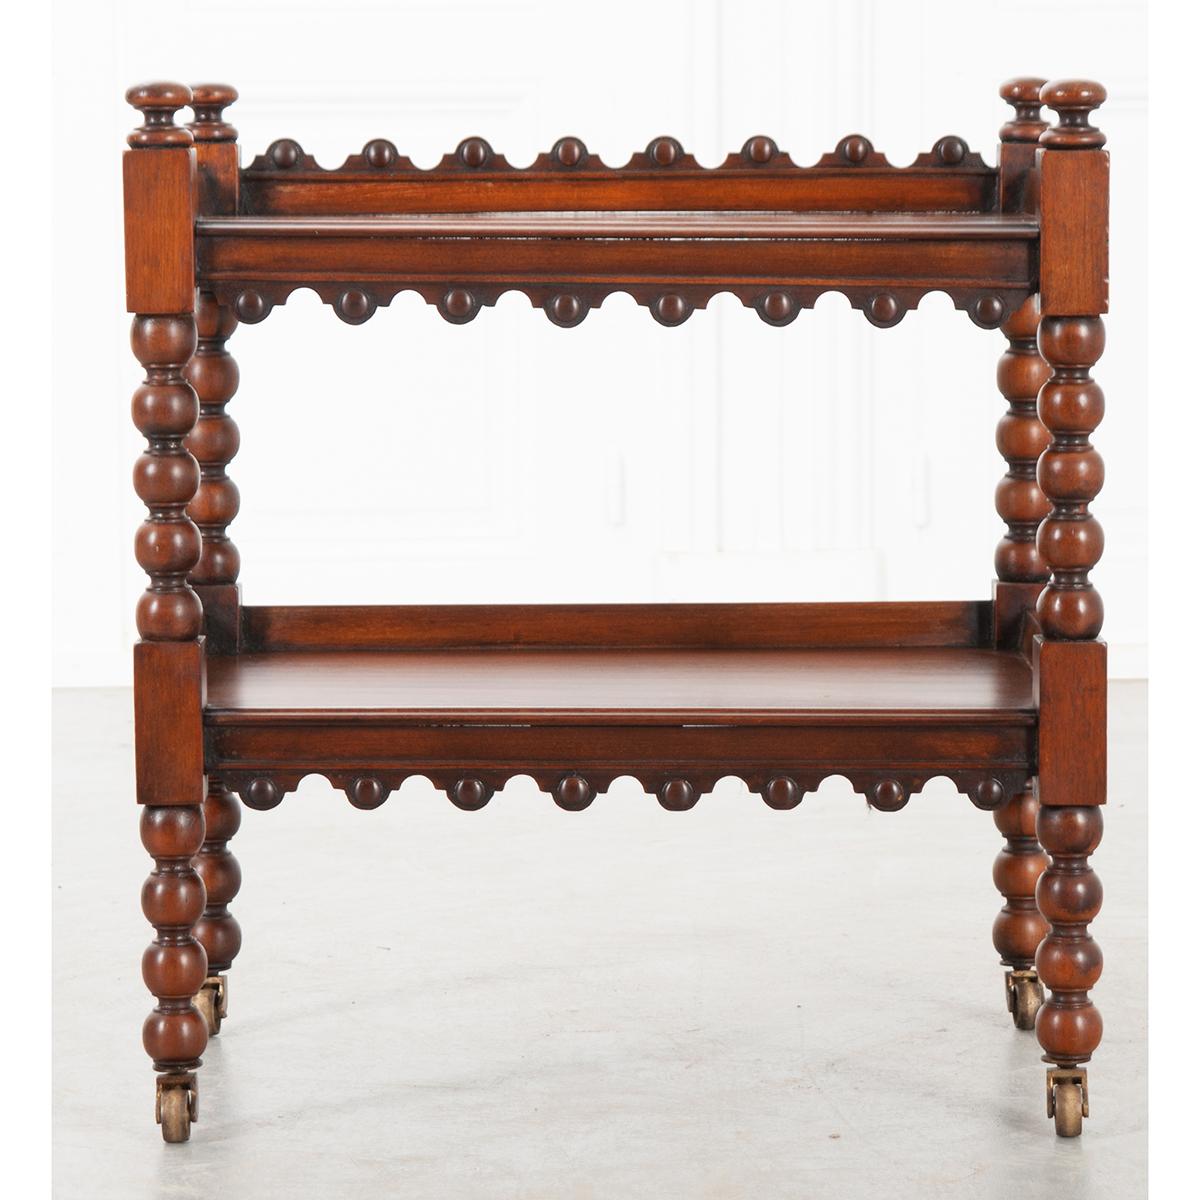 This is a wonderful two-tier mahogany tea trolley, circa 1880. It is a much smaller version of the traditional piece. It features a scalloped edge across the top of the back and the bottom of both shelves. The color is very rich and the patina is